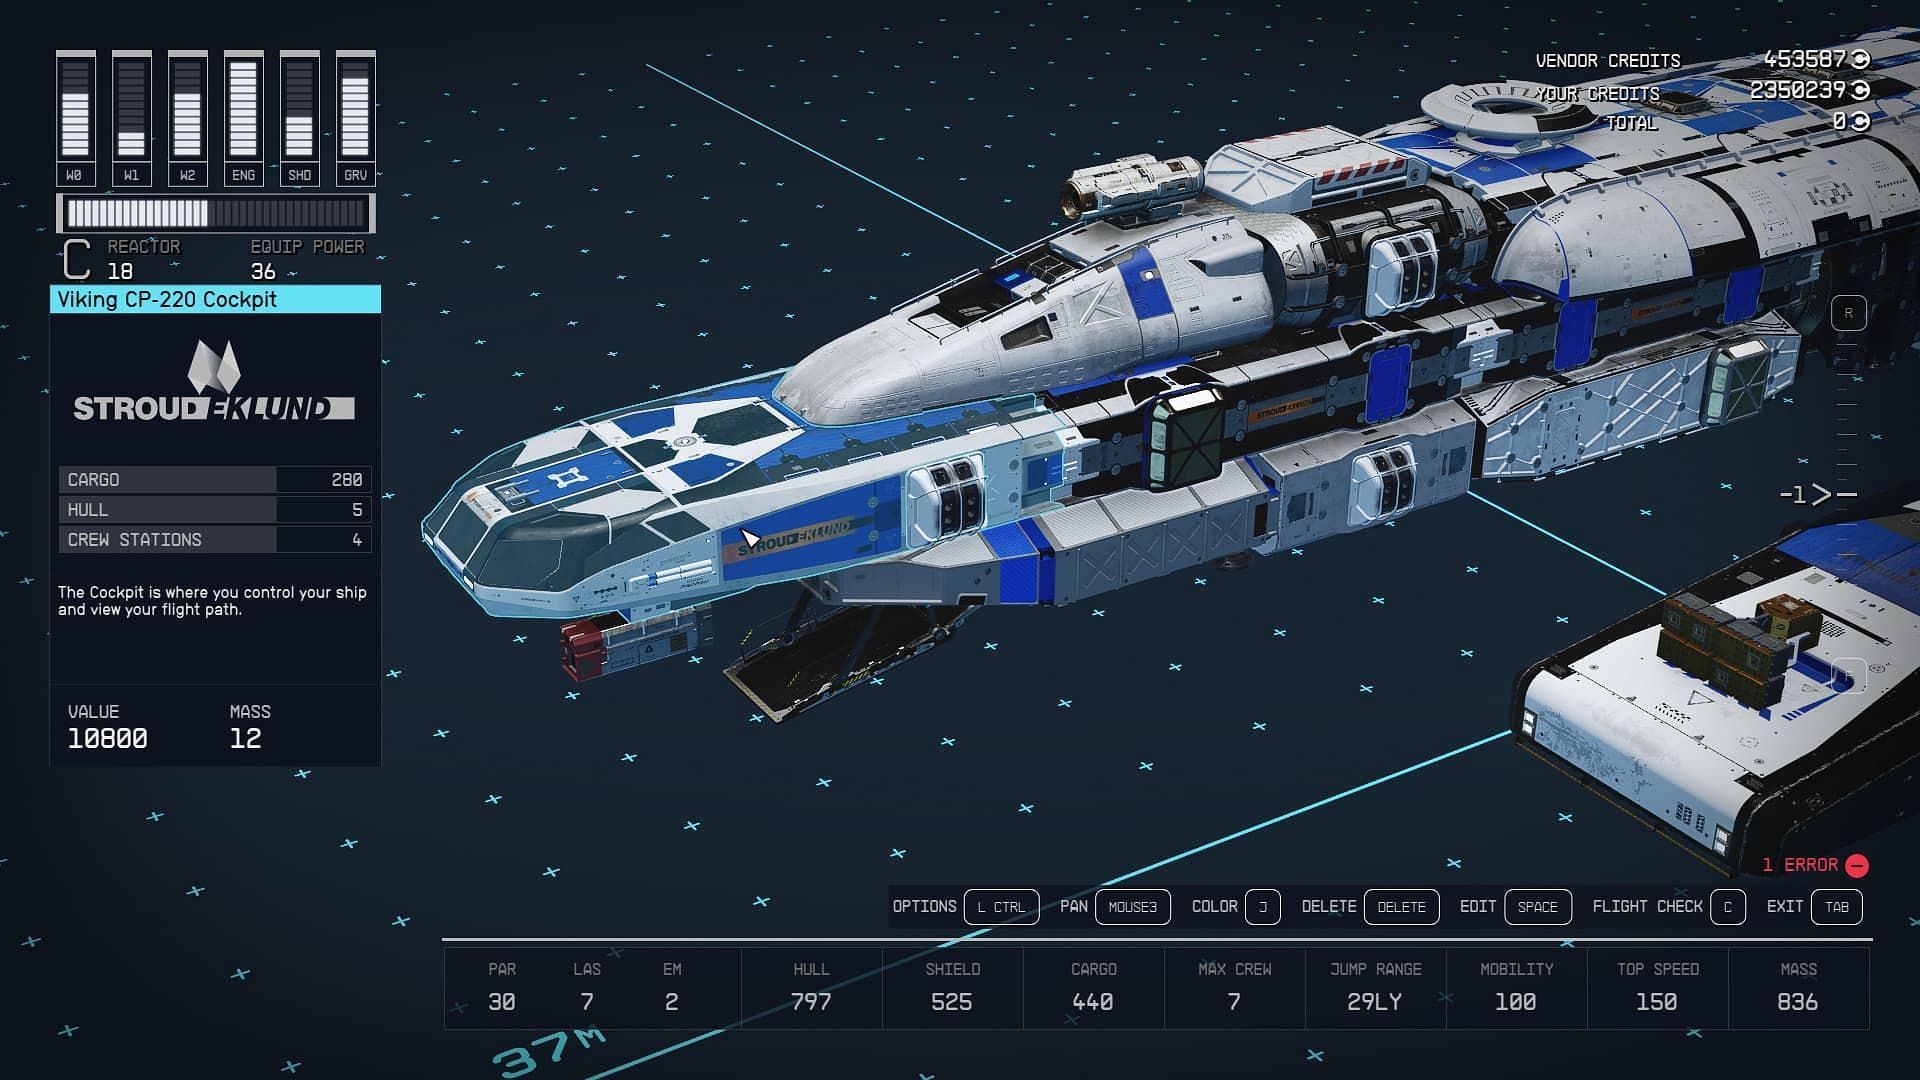 Starfield Mass Effect Normandy Spaceship guide: Parts, colors, and more